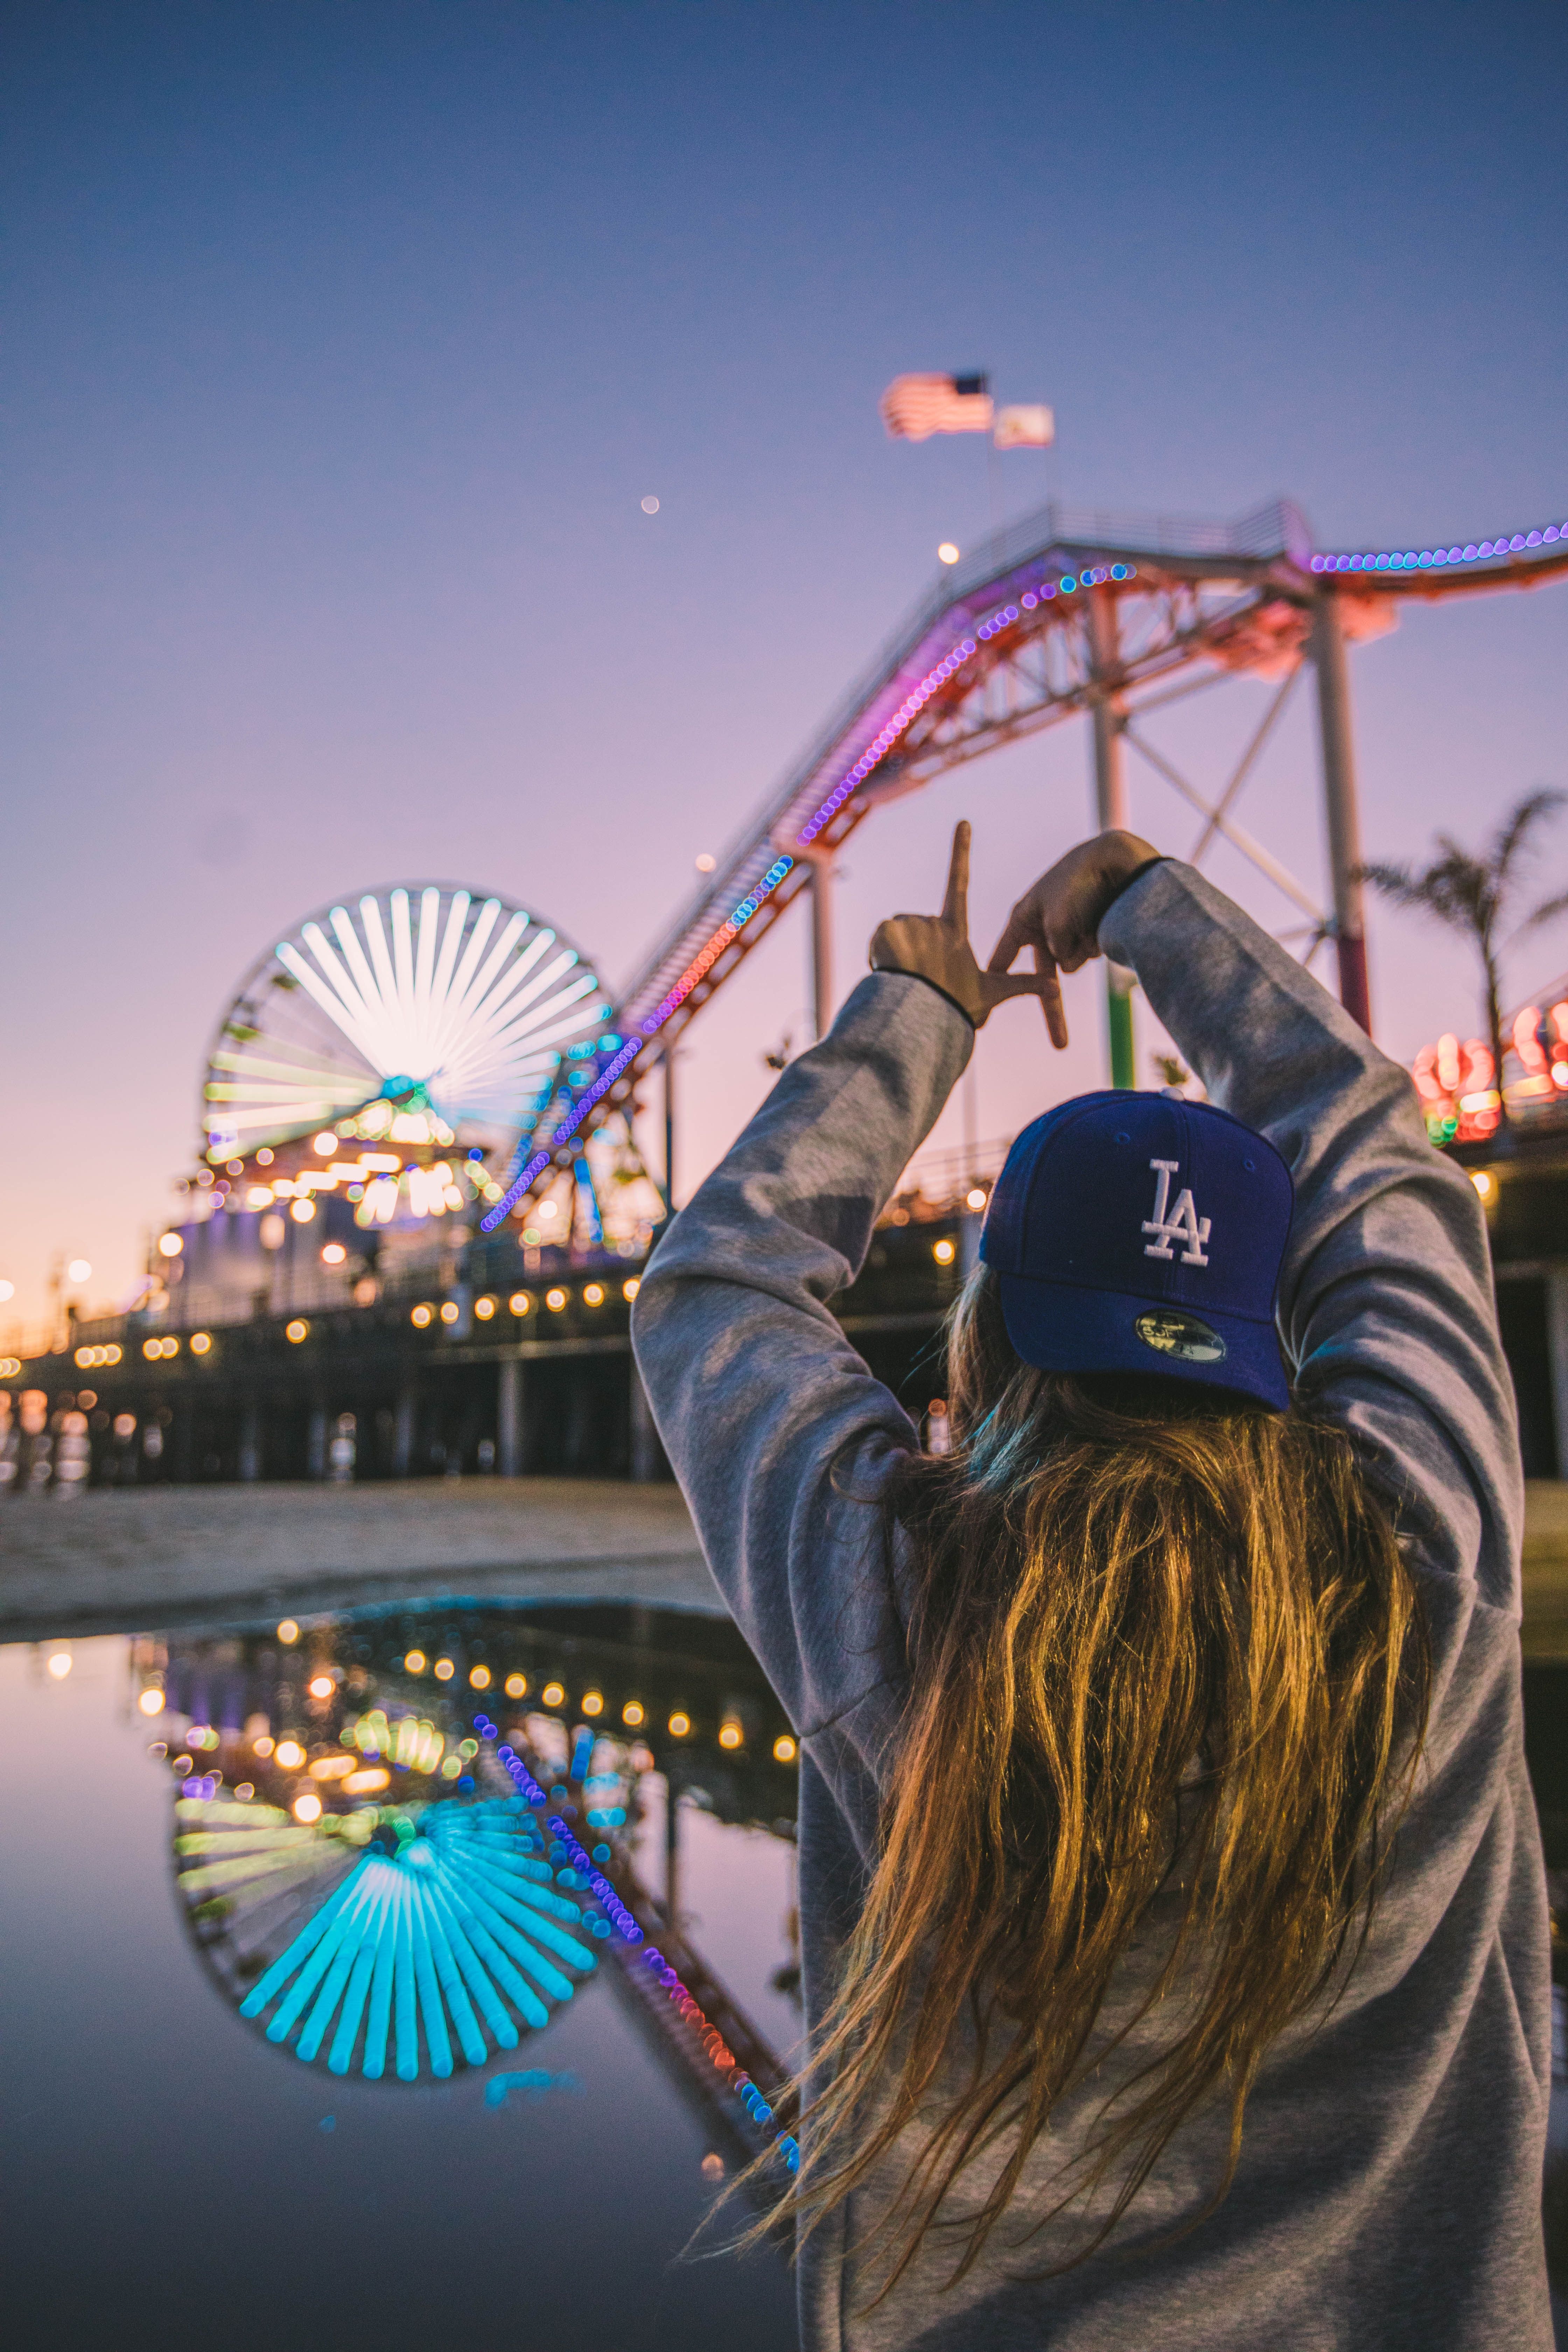 A woman in a blue baseball cap standing in front of a ferris wheel - Los Angeles, California